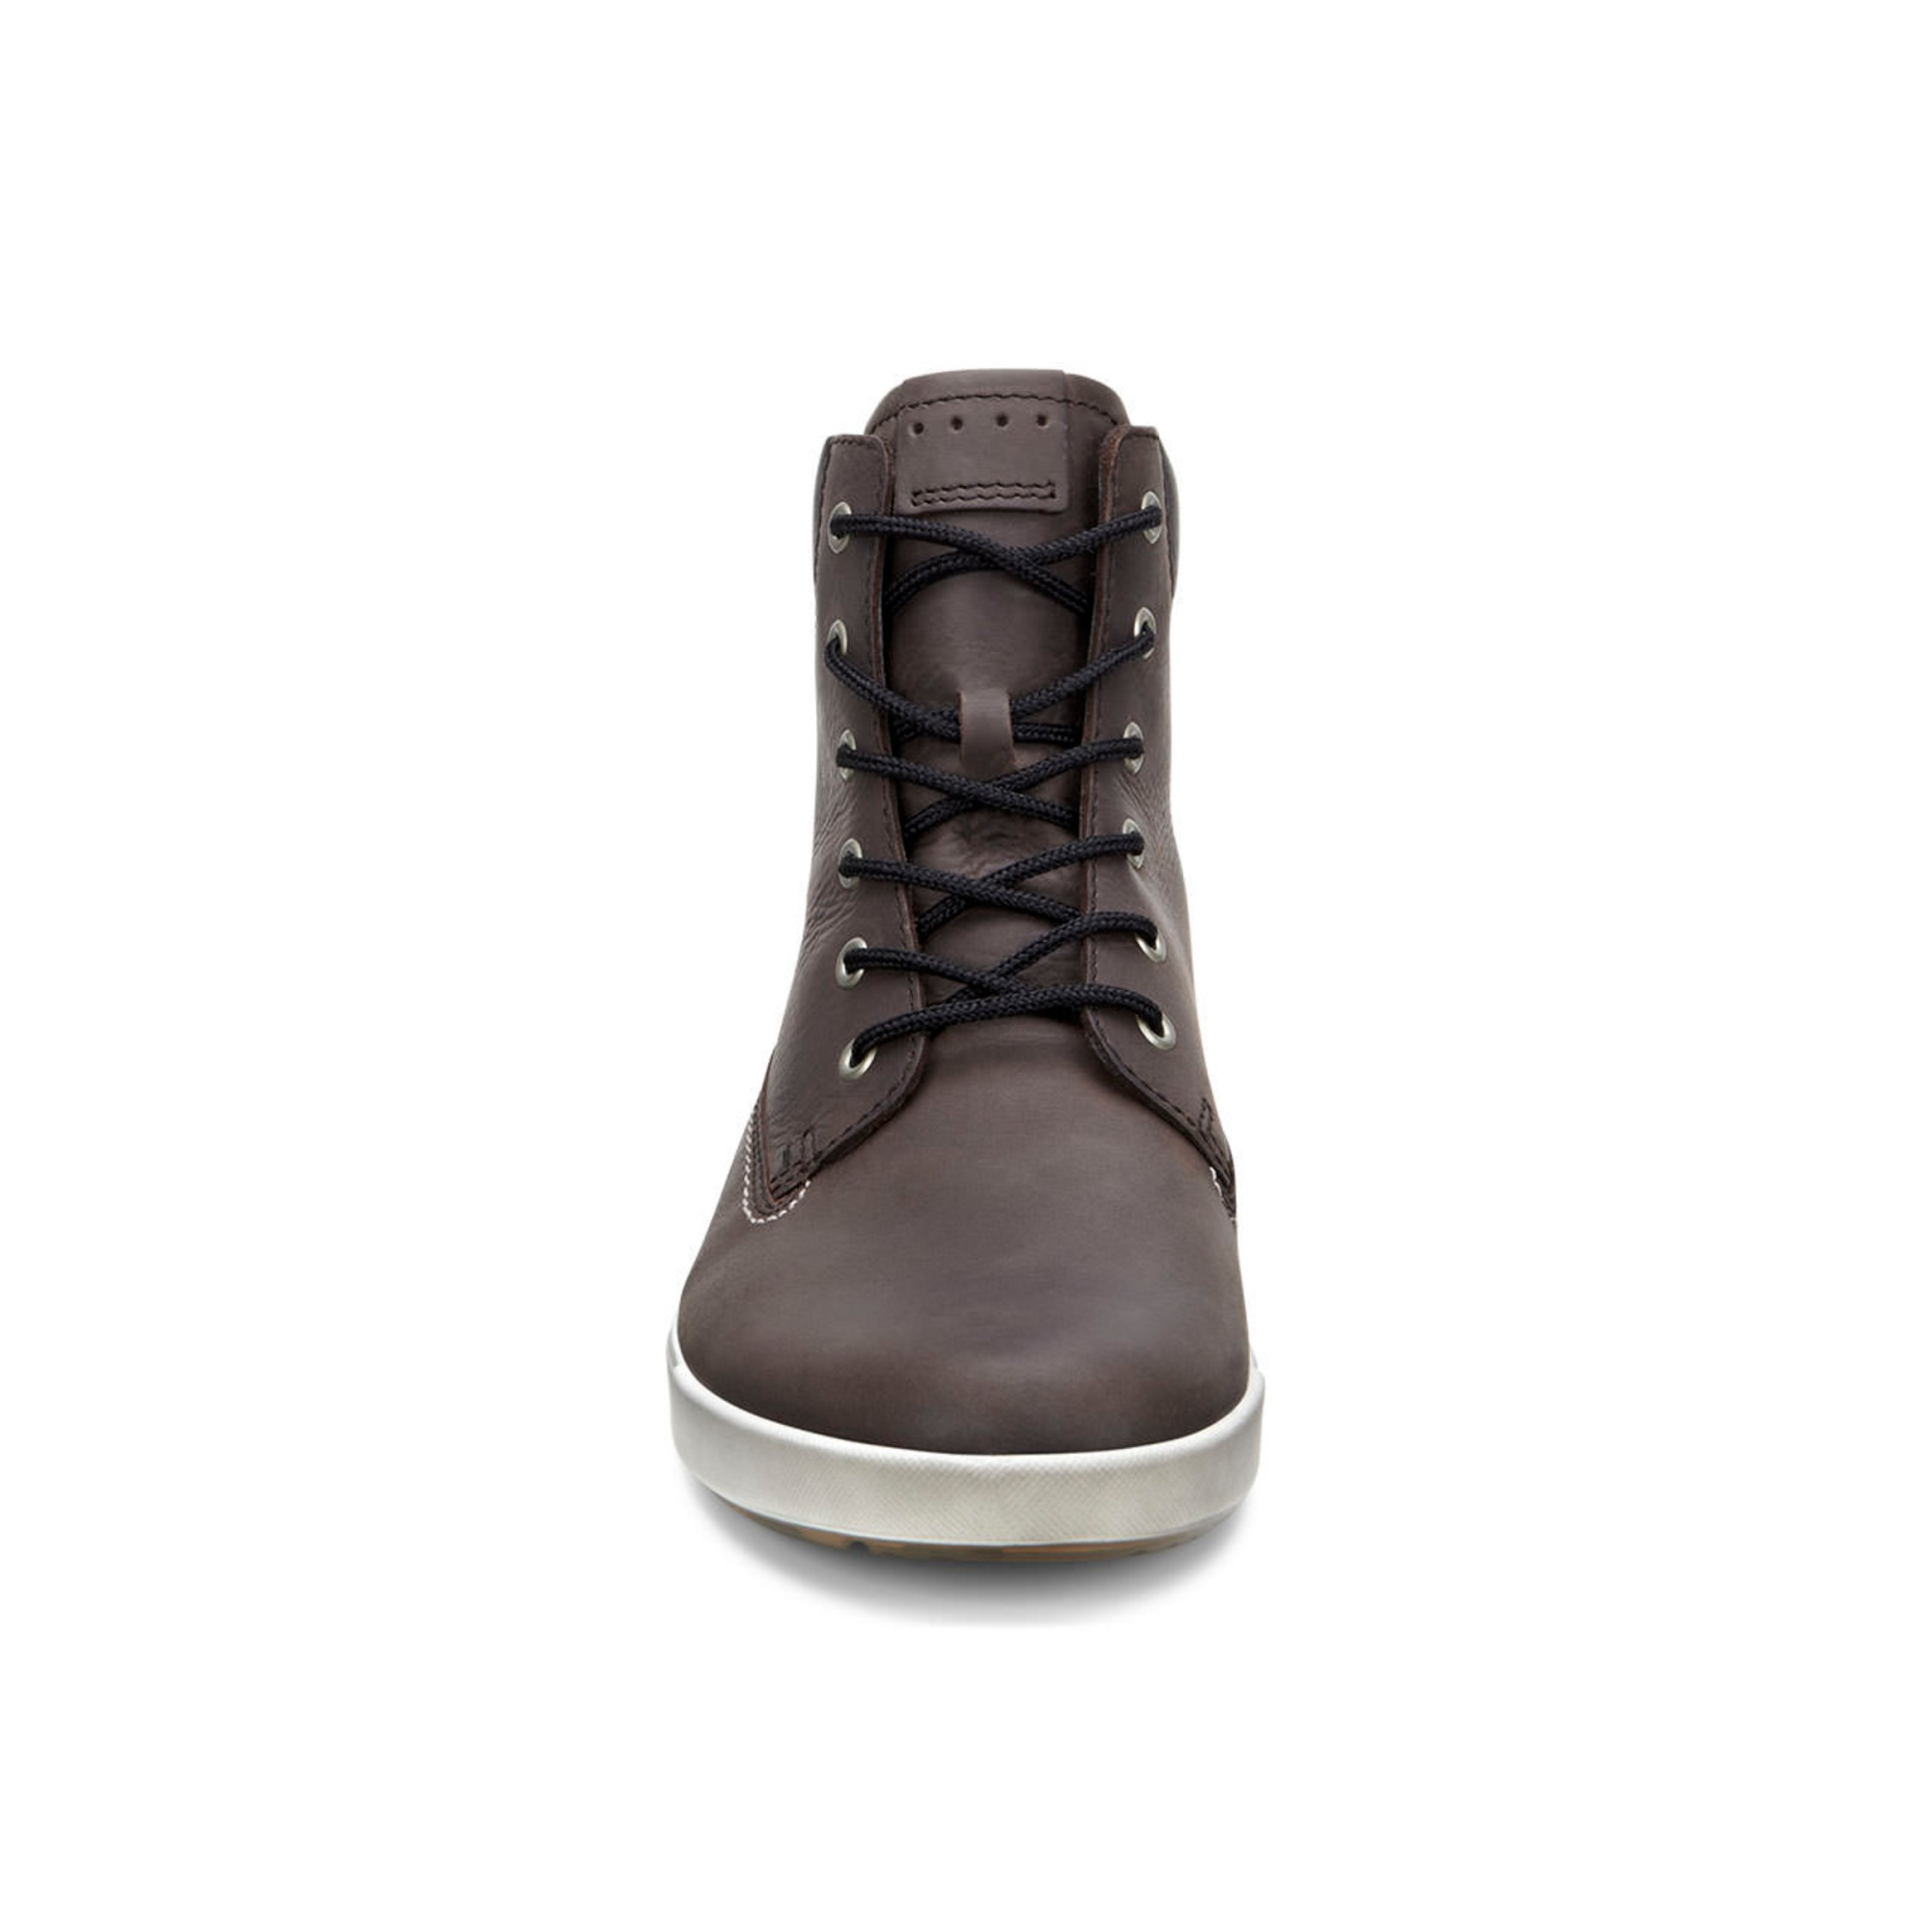 opføre sig Pest buket Ecco Eisner Boot 39 - Products - Veryk Mall - Veryk Mall, many product,  quick response, safe your money!